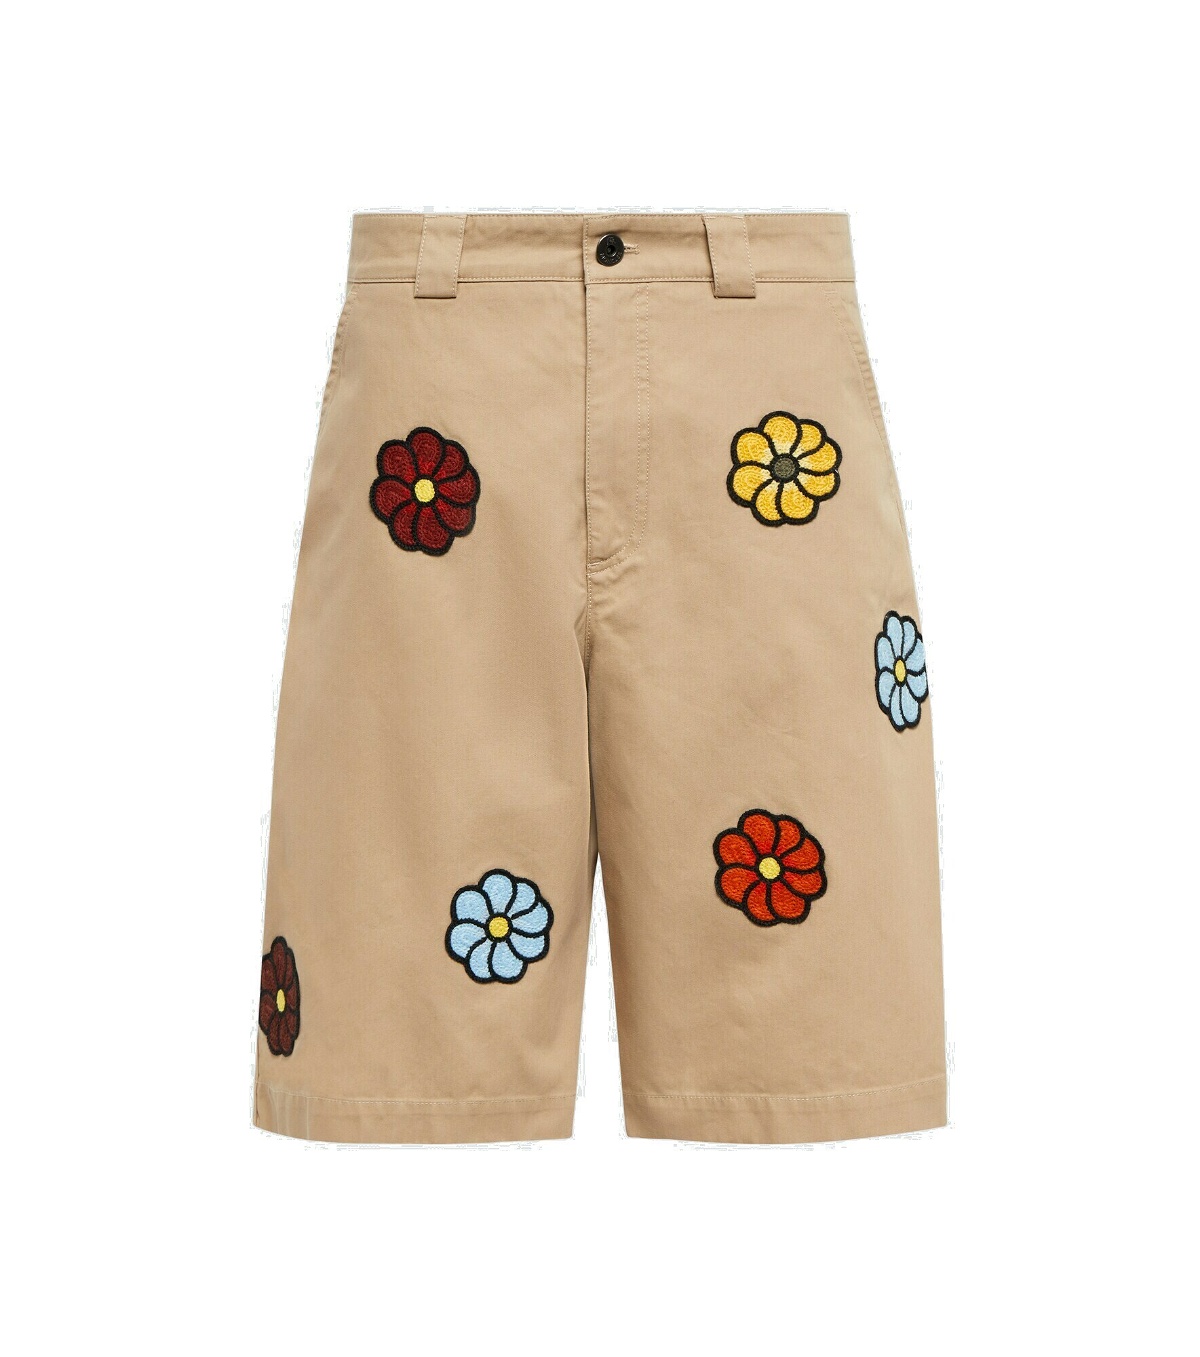 Moncler Genius - 1 Moncler JW Anderson embroidered cotton shorts ...